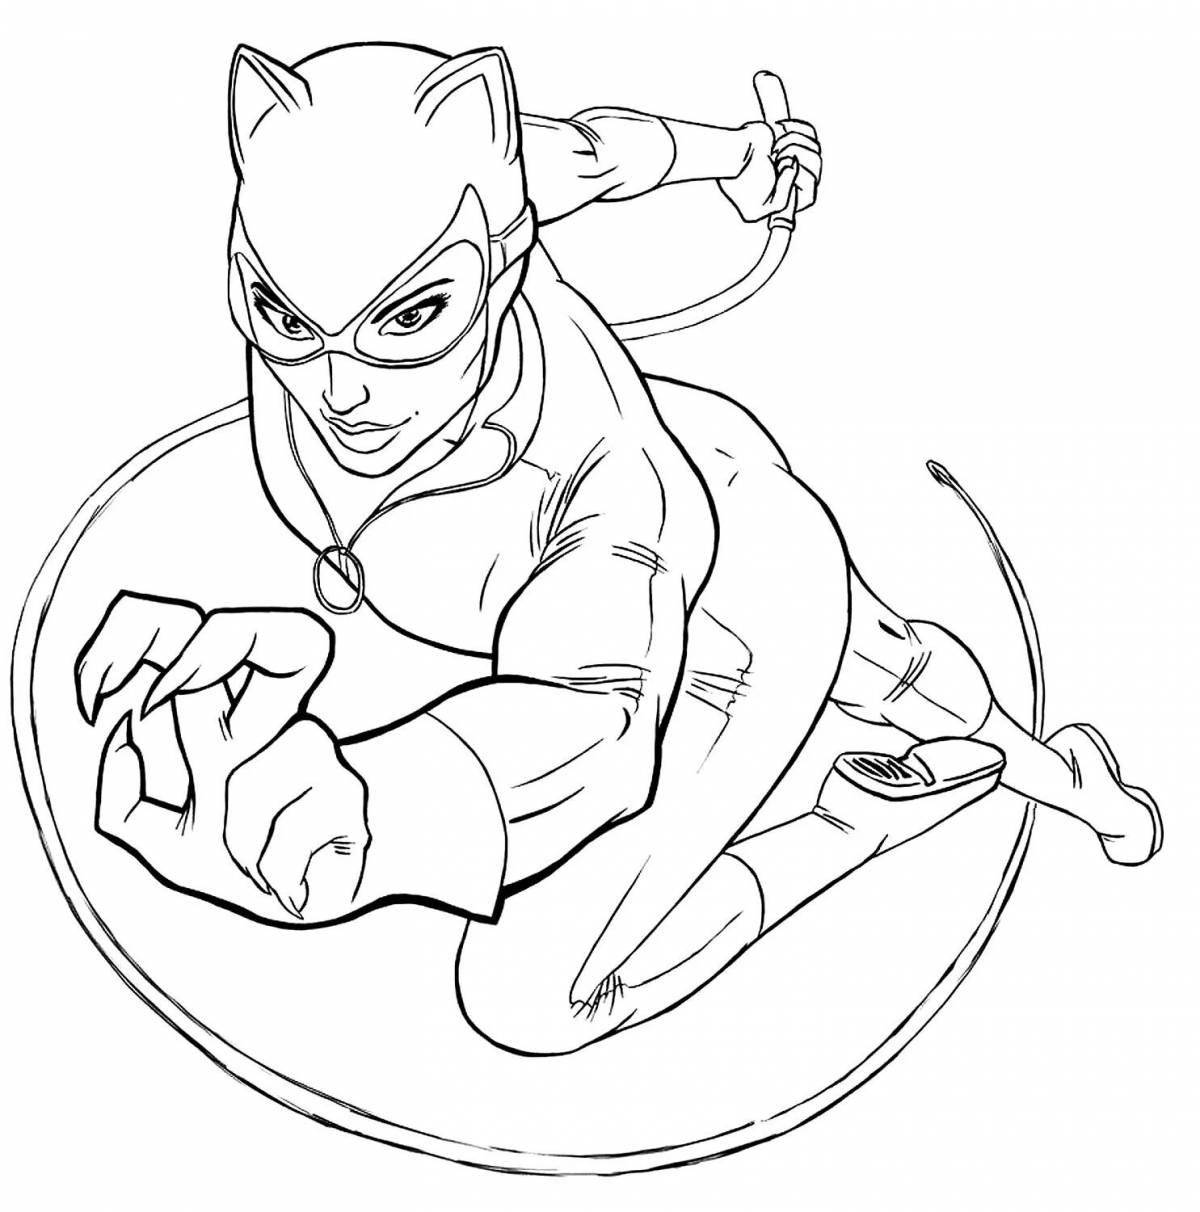 Fabulous superhero coloring pages for 4-5 year olds